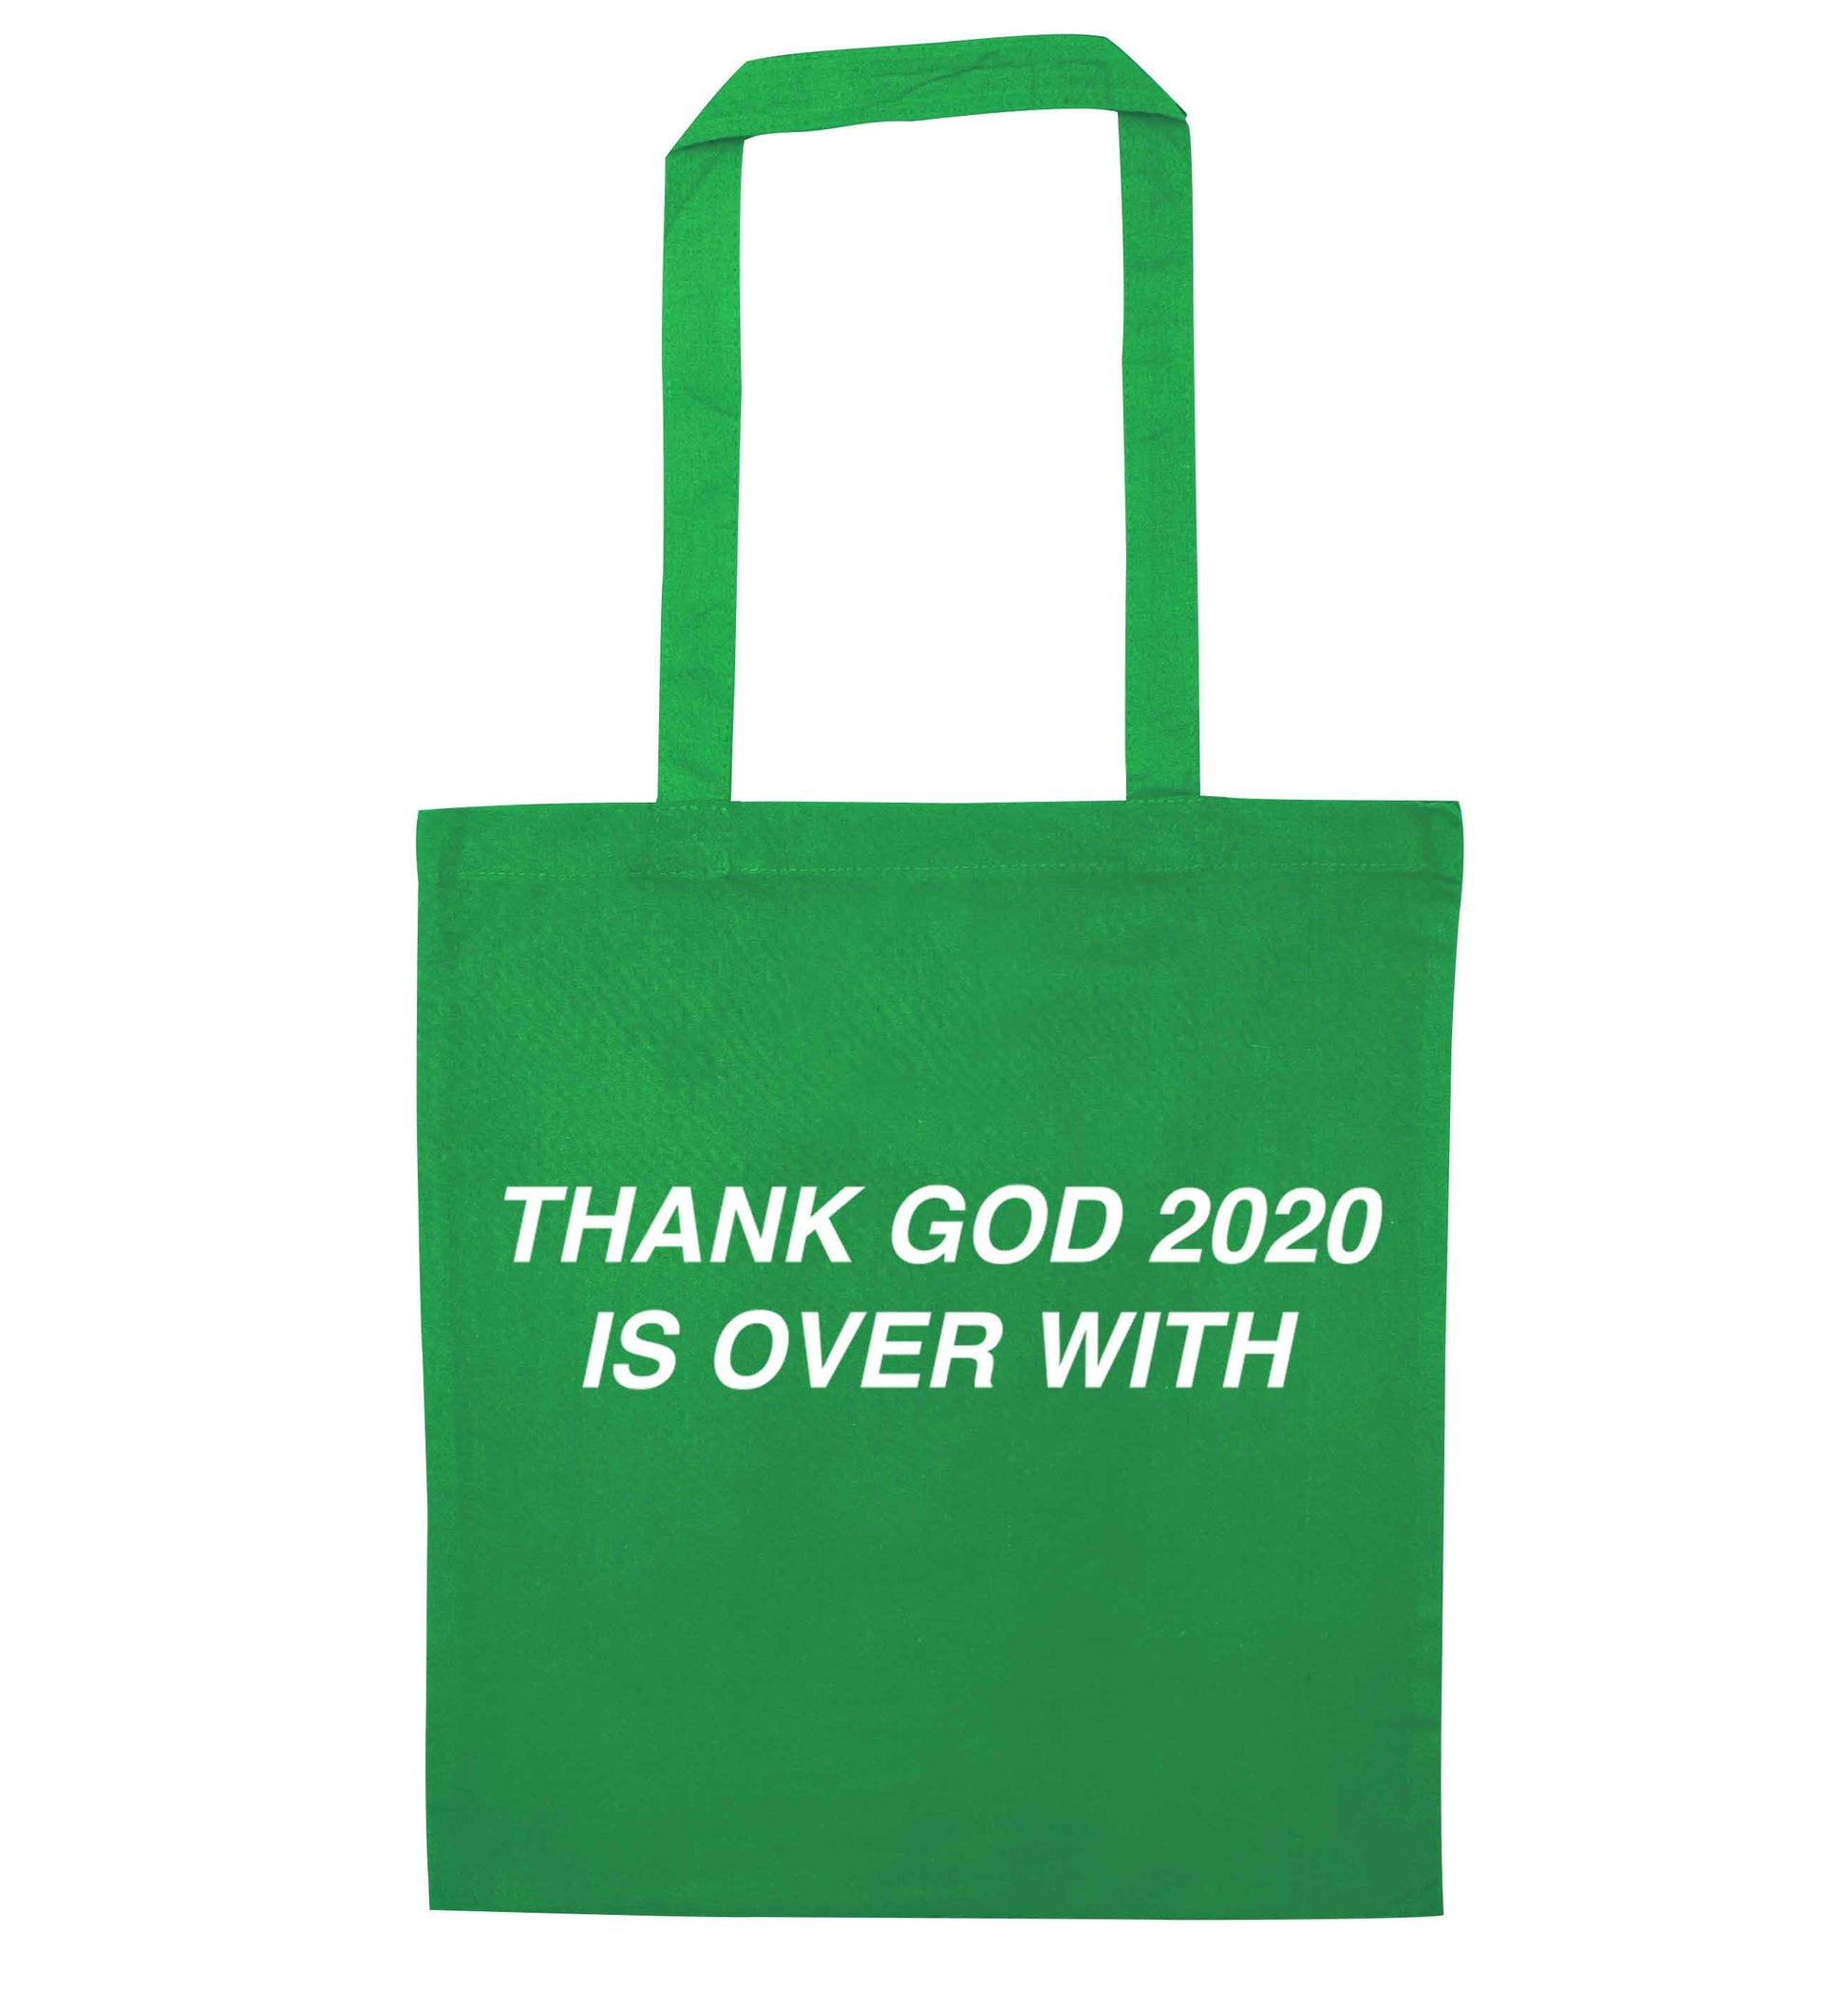 Thank god 2020 is over with green tote bag